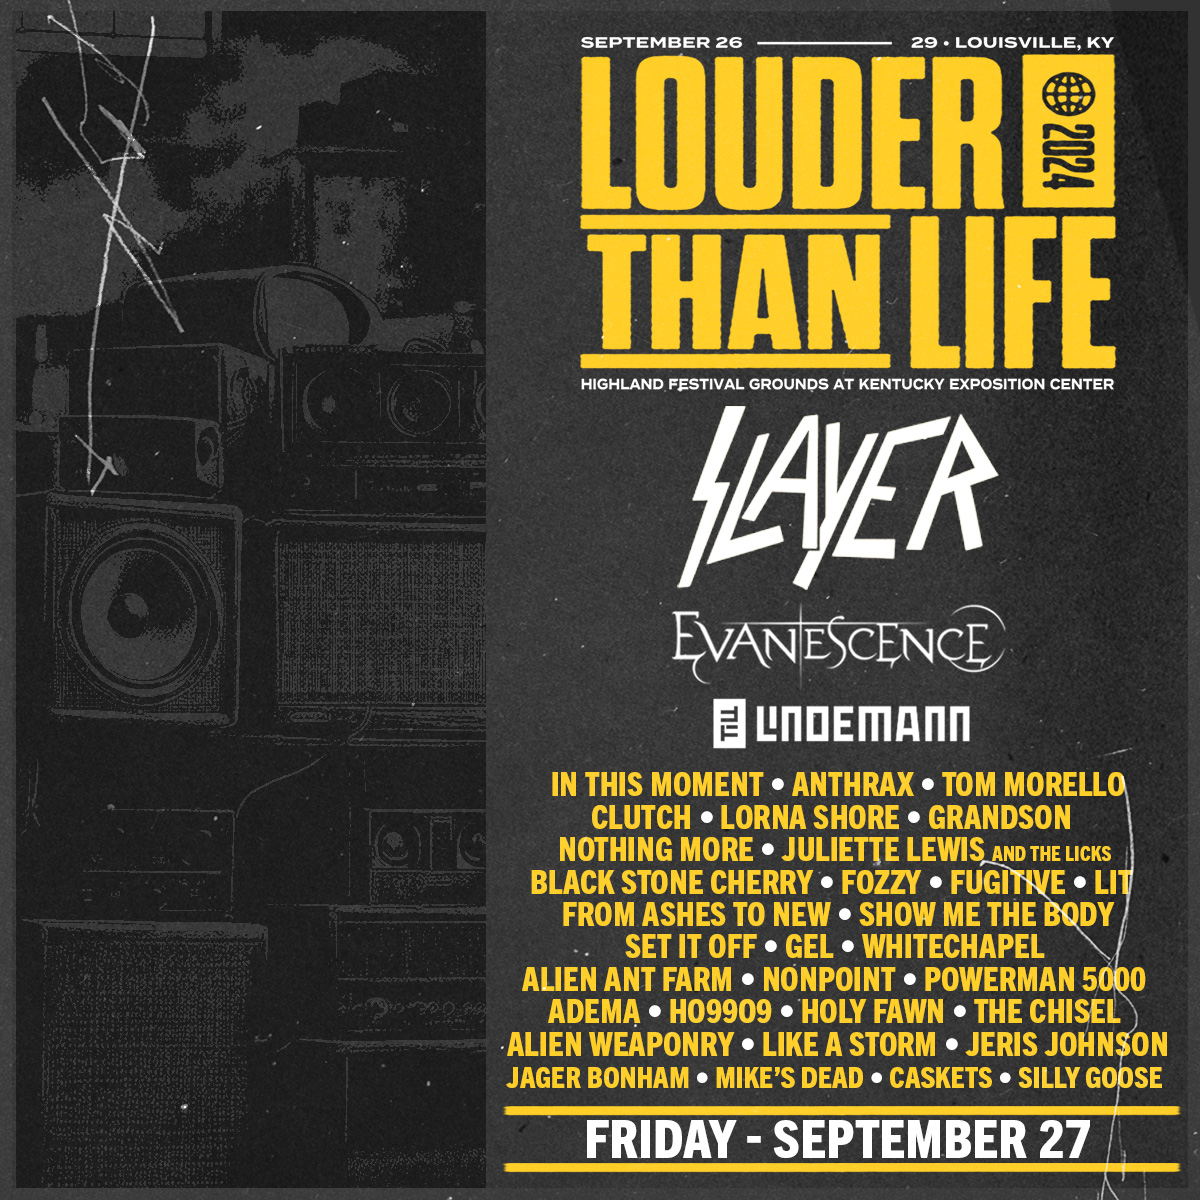 Get ready to unleash your inner demons at Louder Than Life! Friday’s lineup is stacked with the legends of rock and metal, featuring @Slayer, @evanescence, @OfficialITM, and a host of other incredible acts. Don’t miss your chance to experience the ultimate day of music and